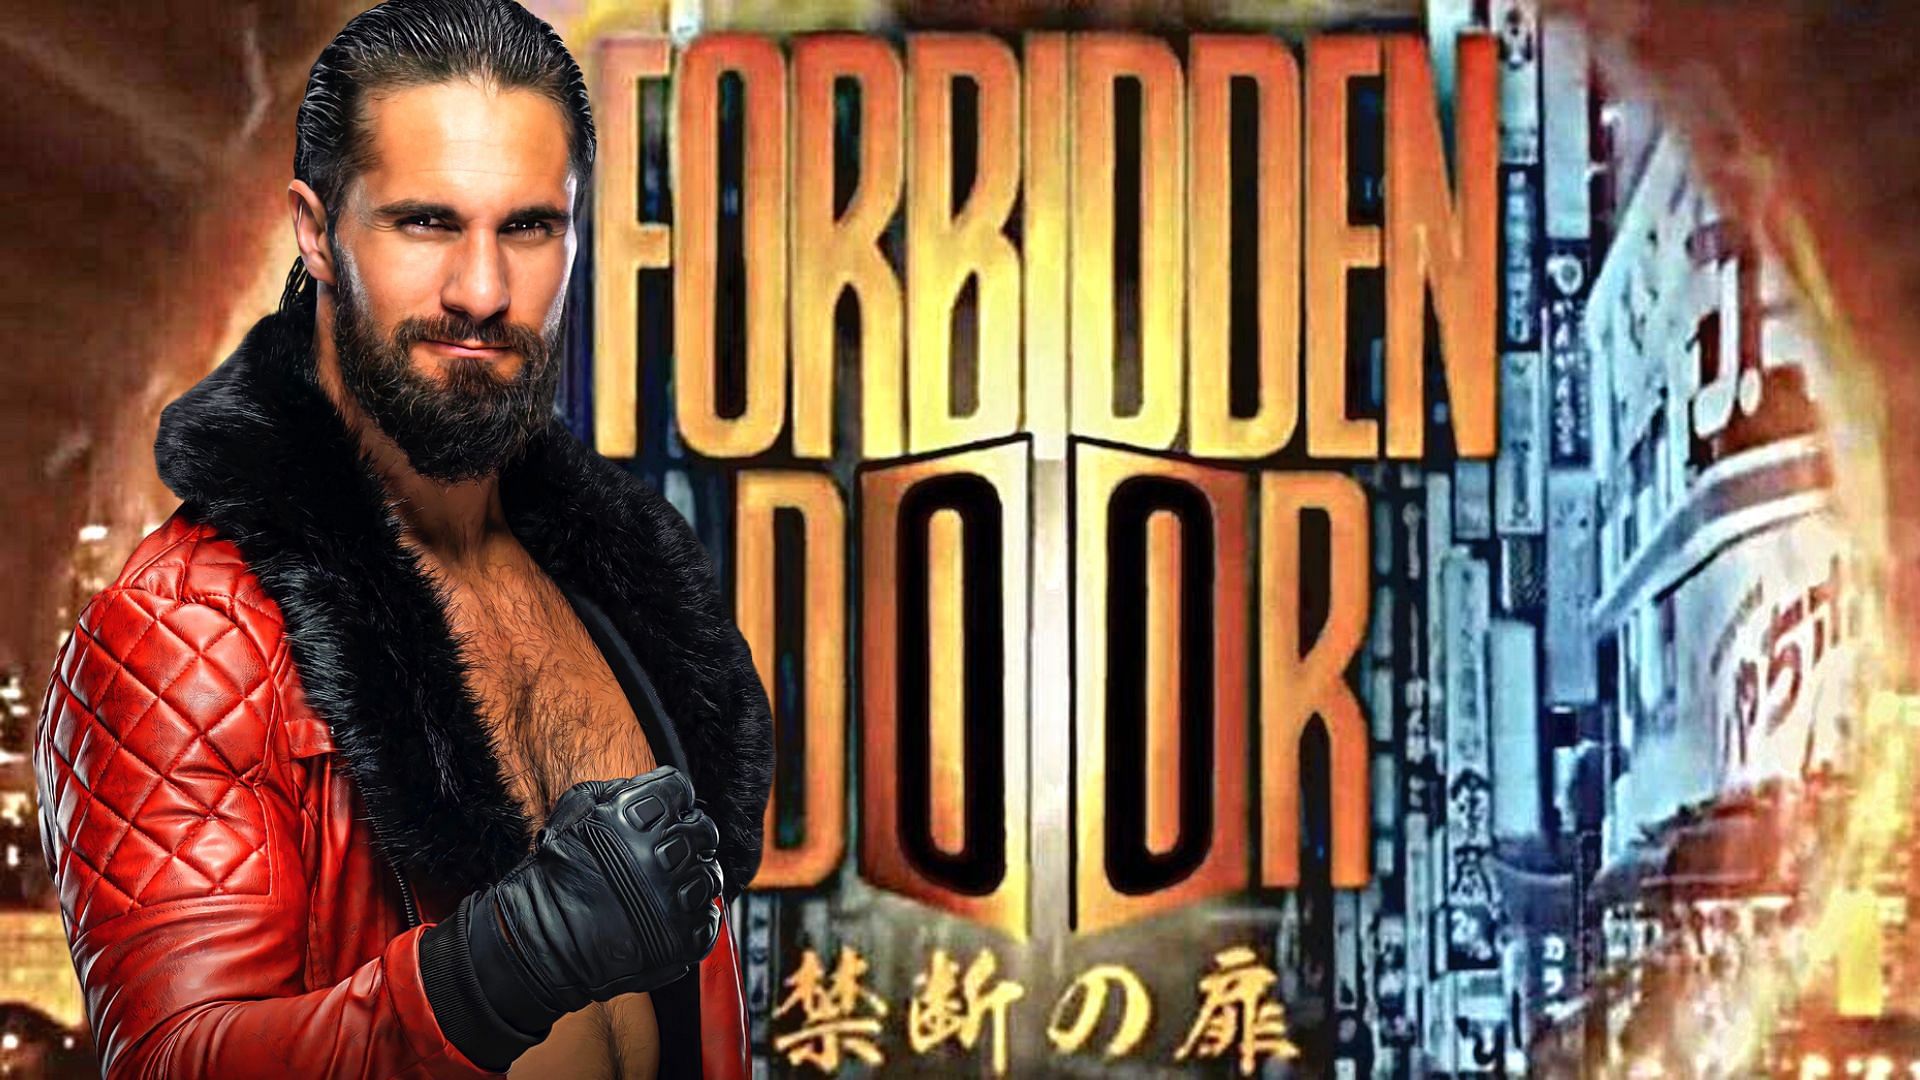 Seth Rollins may have a new challenger in the future